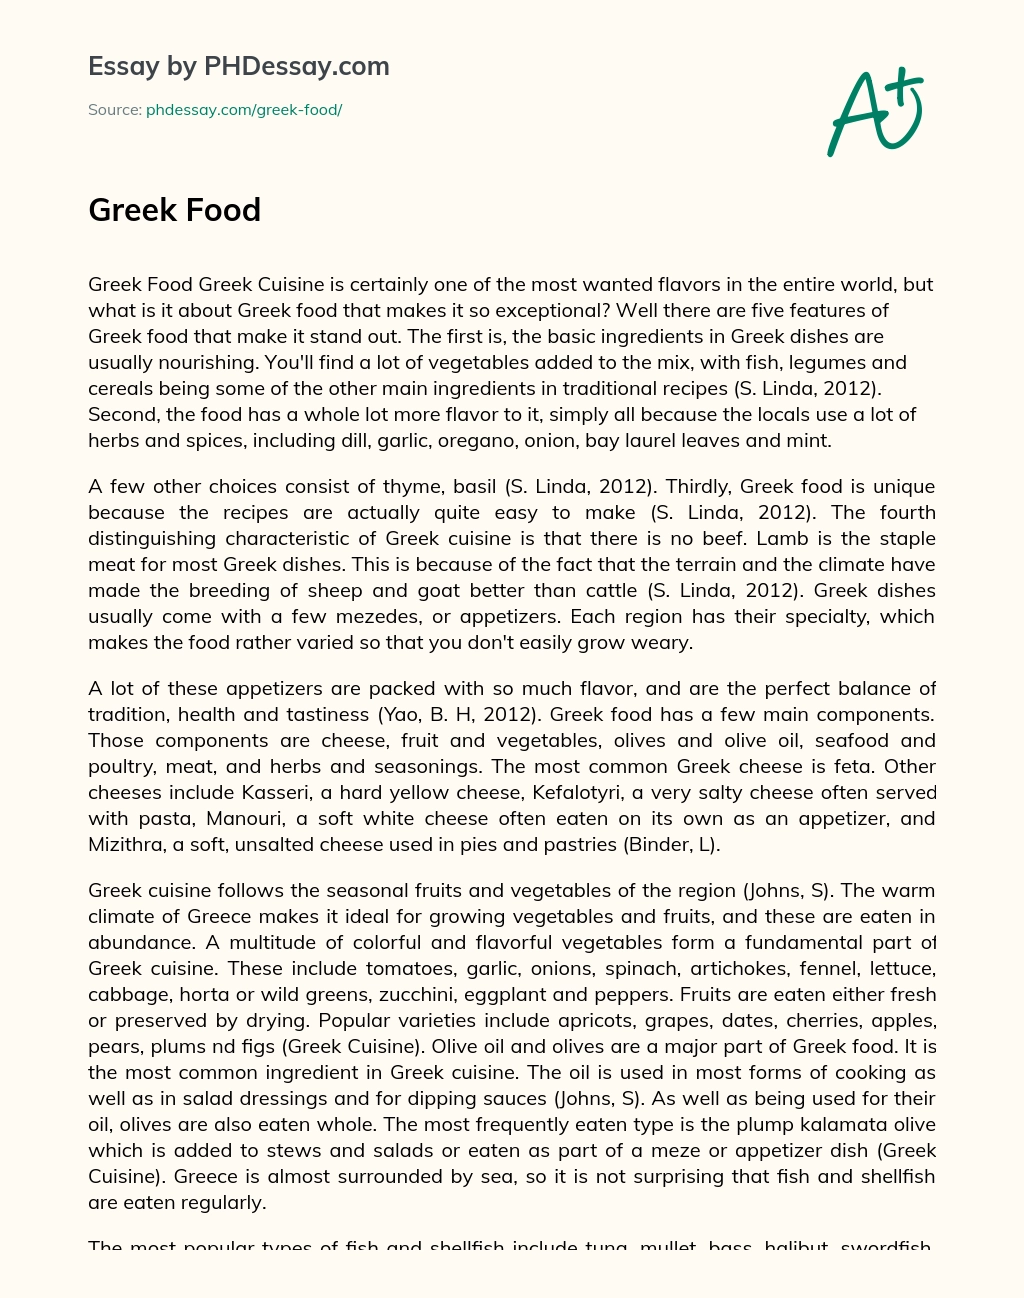 Features that Make Greek Cuisine Stand Out essay